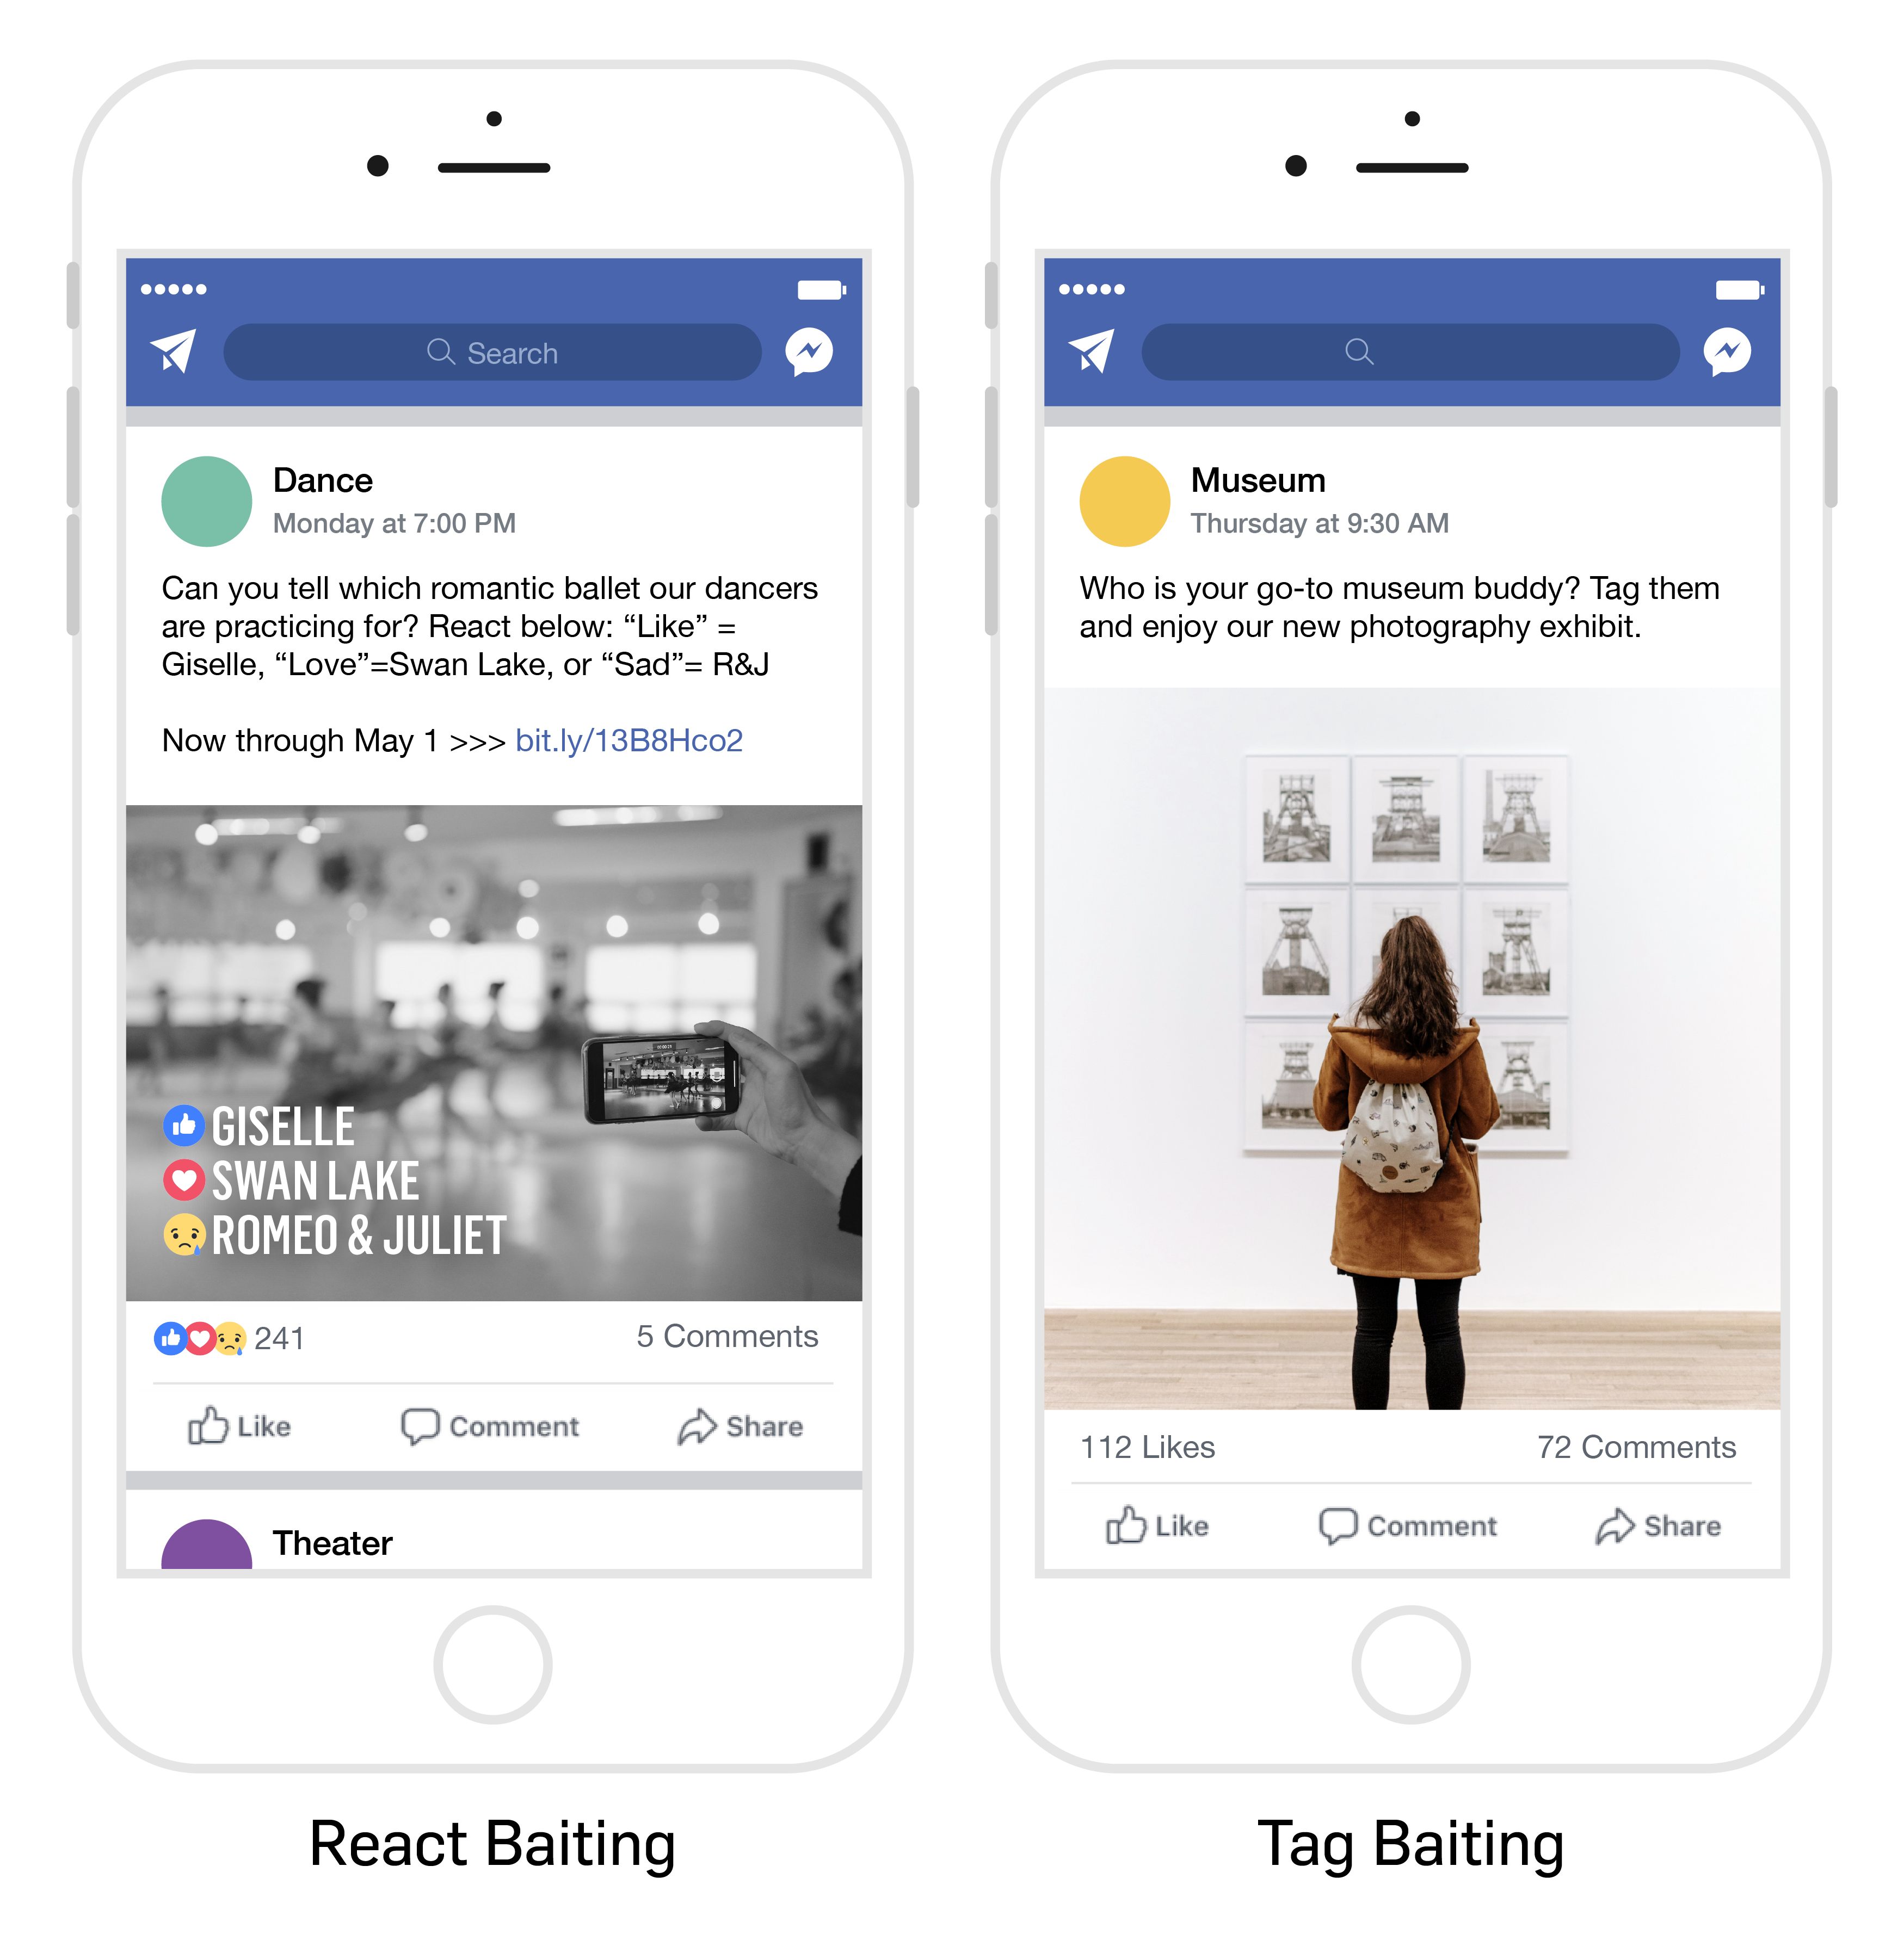 Image with mobile phone examples of both "React Baiting" and "Tag Baiting"